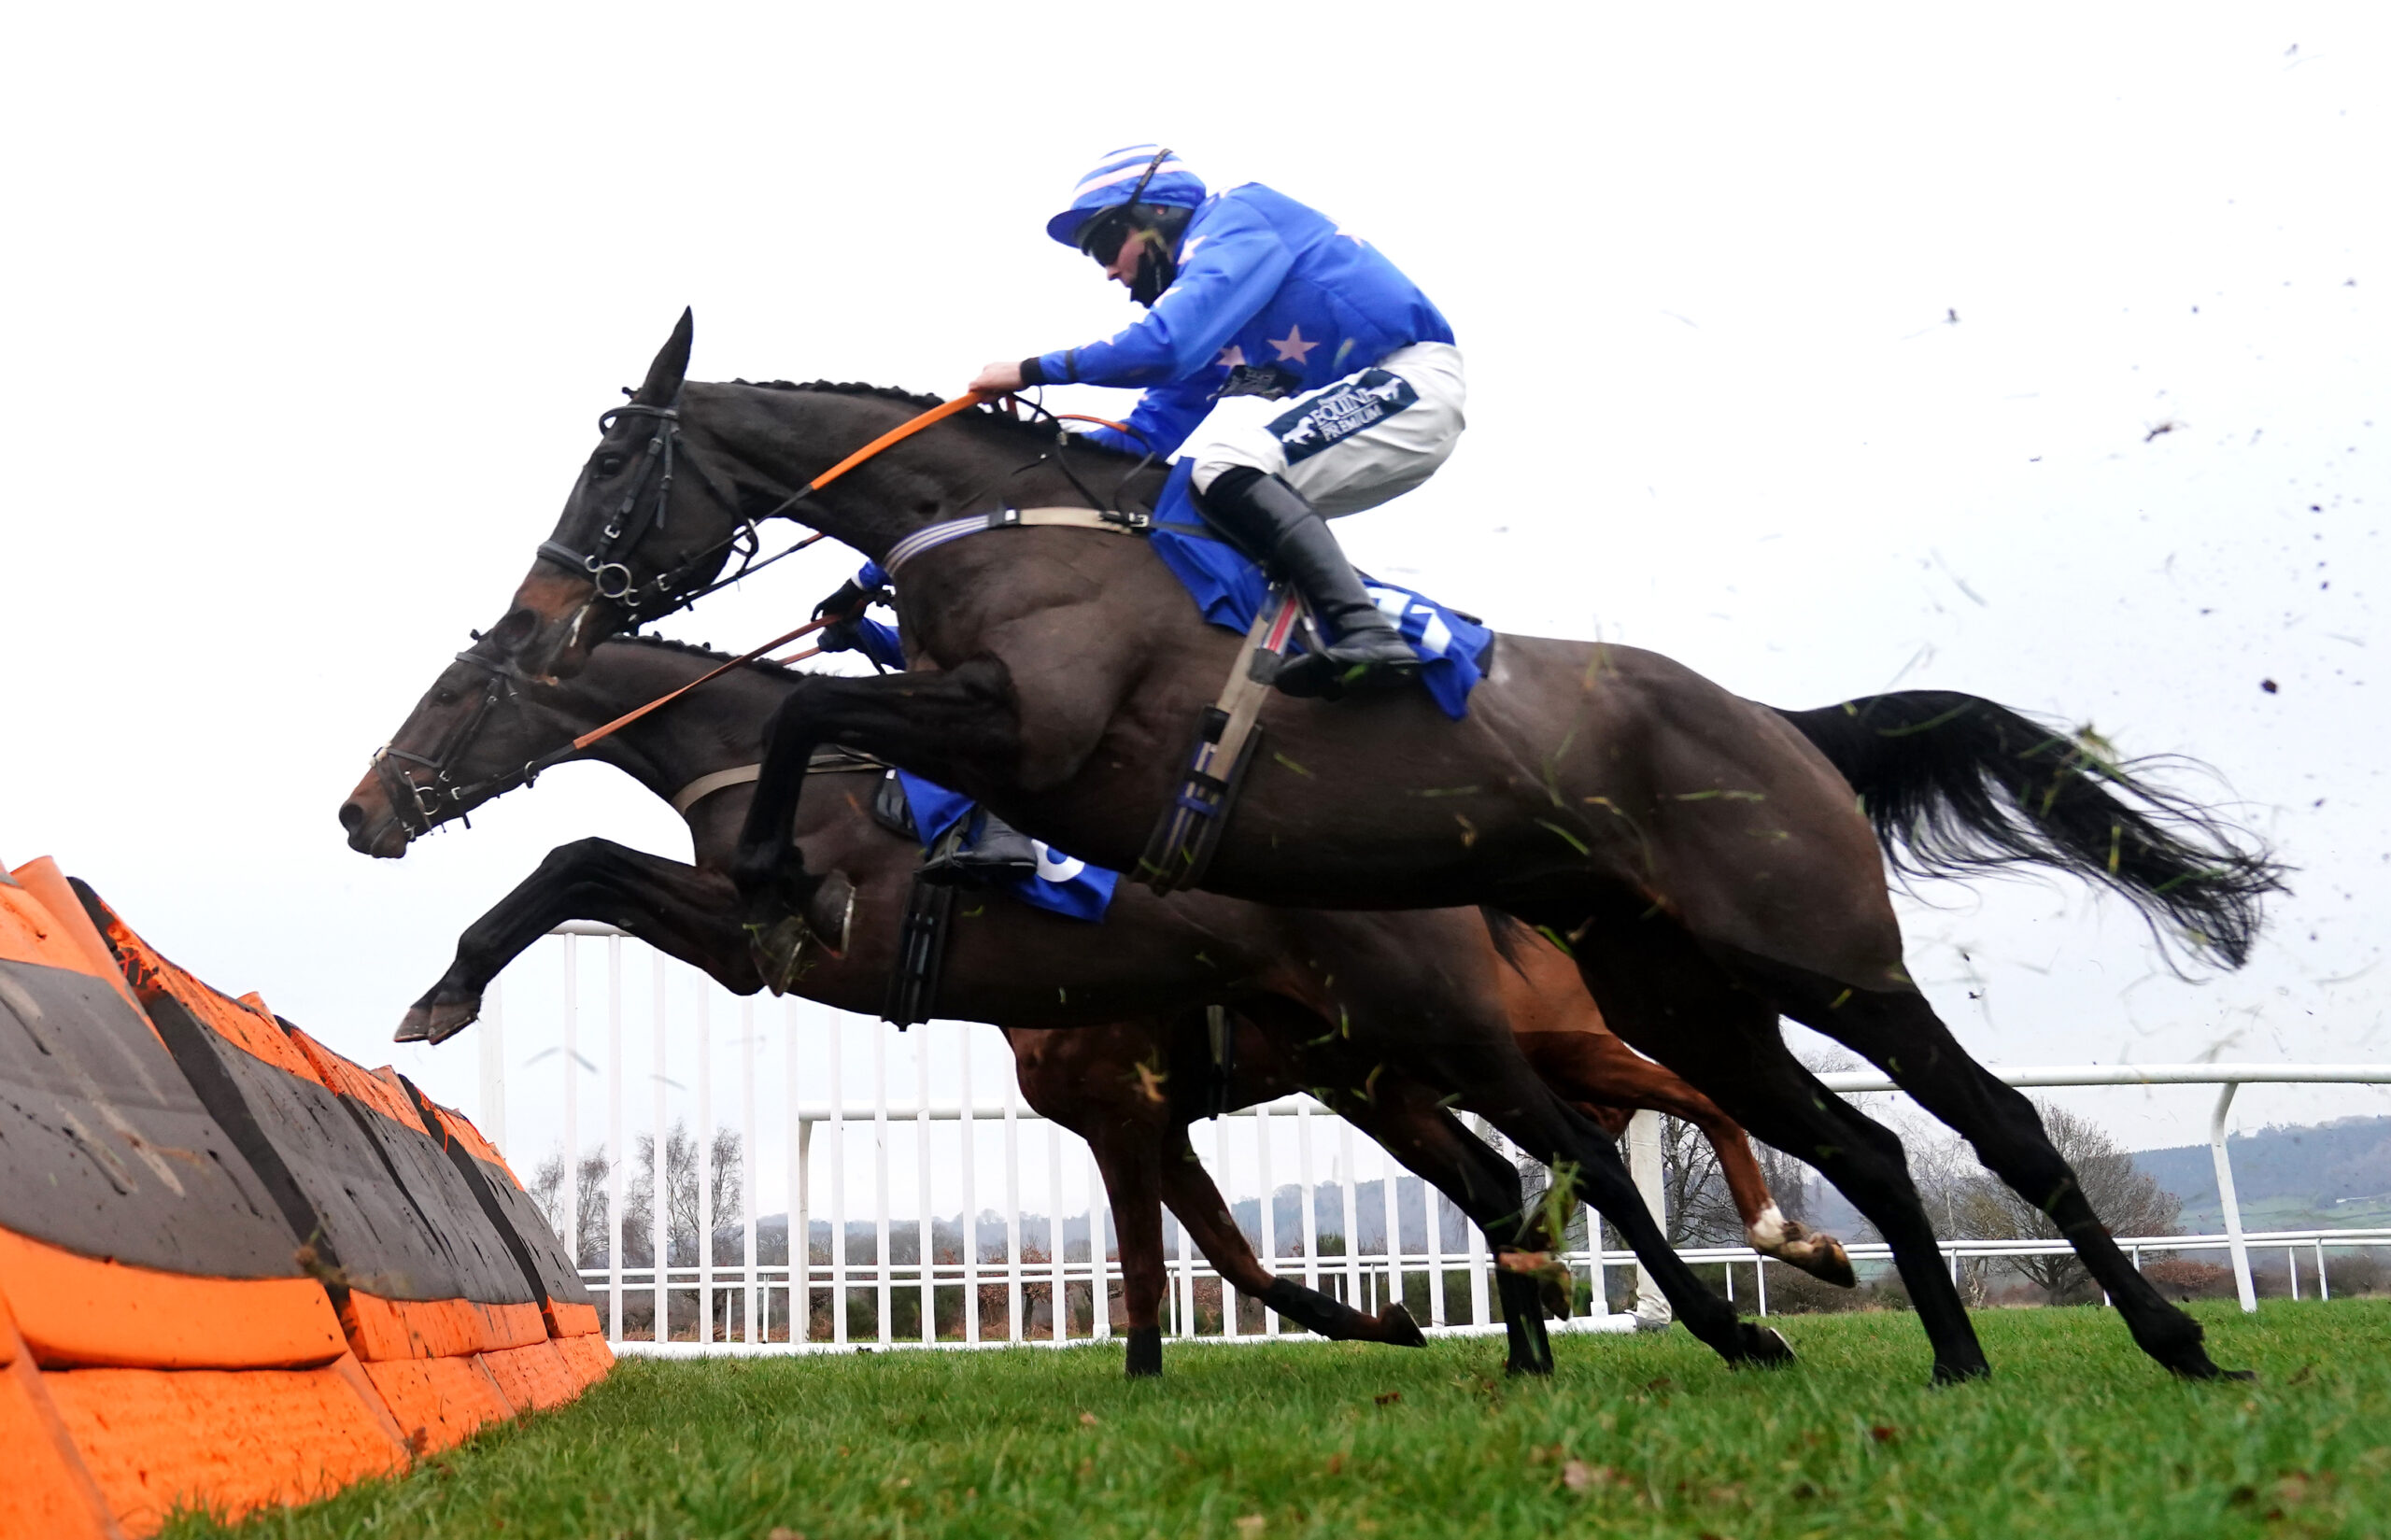 Malaita can bring up her hat-trick in the Clarke Chase at Uttoxeter.